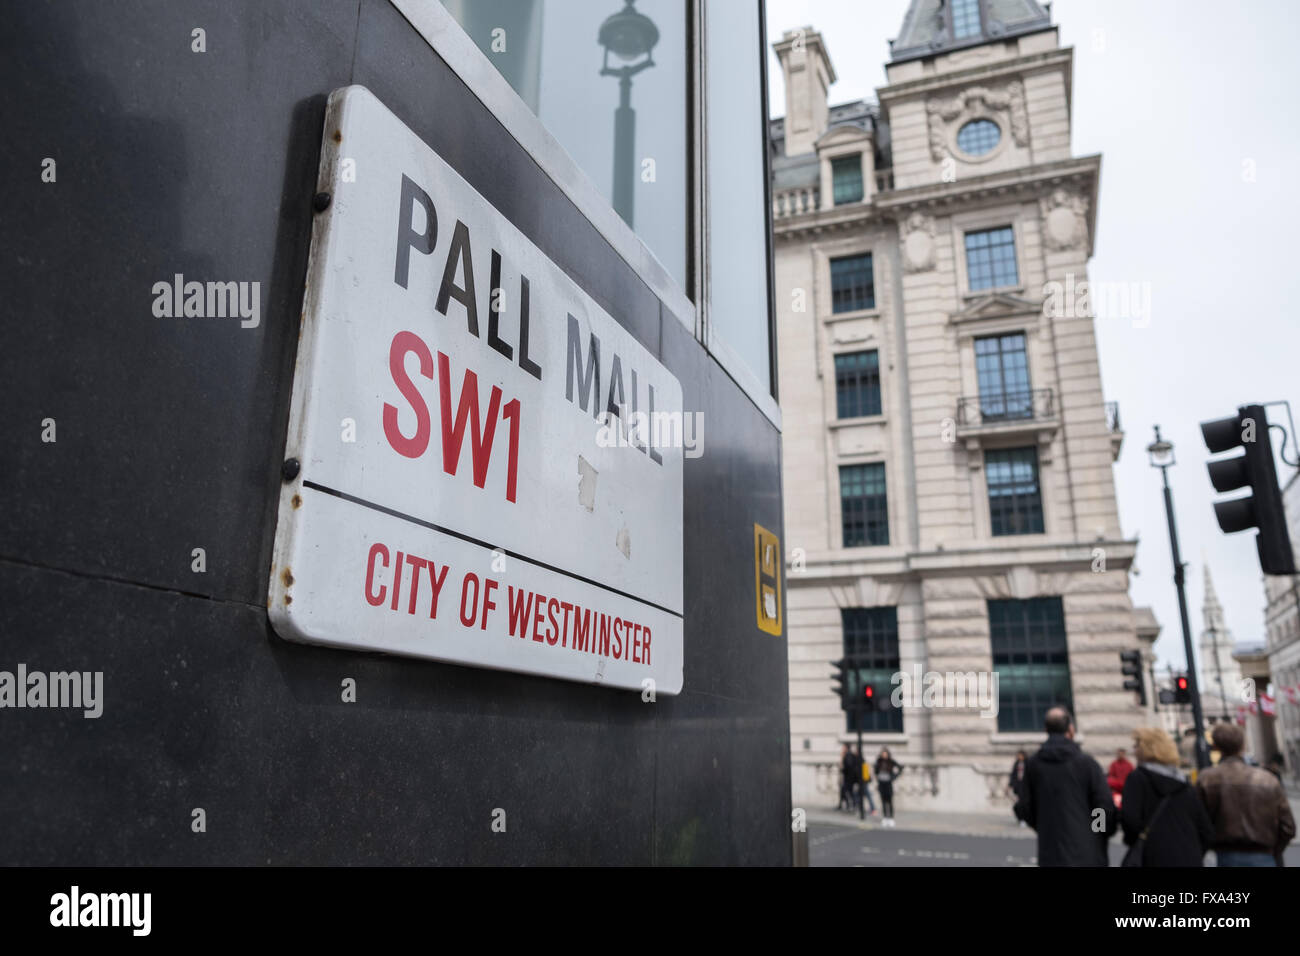 Pall Mall sign SW1 City of Westminster London Stock Photo